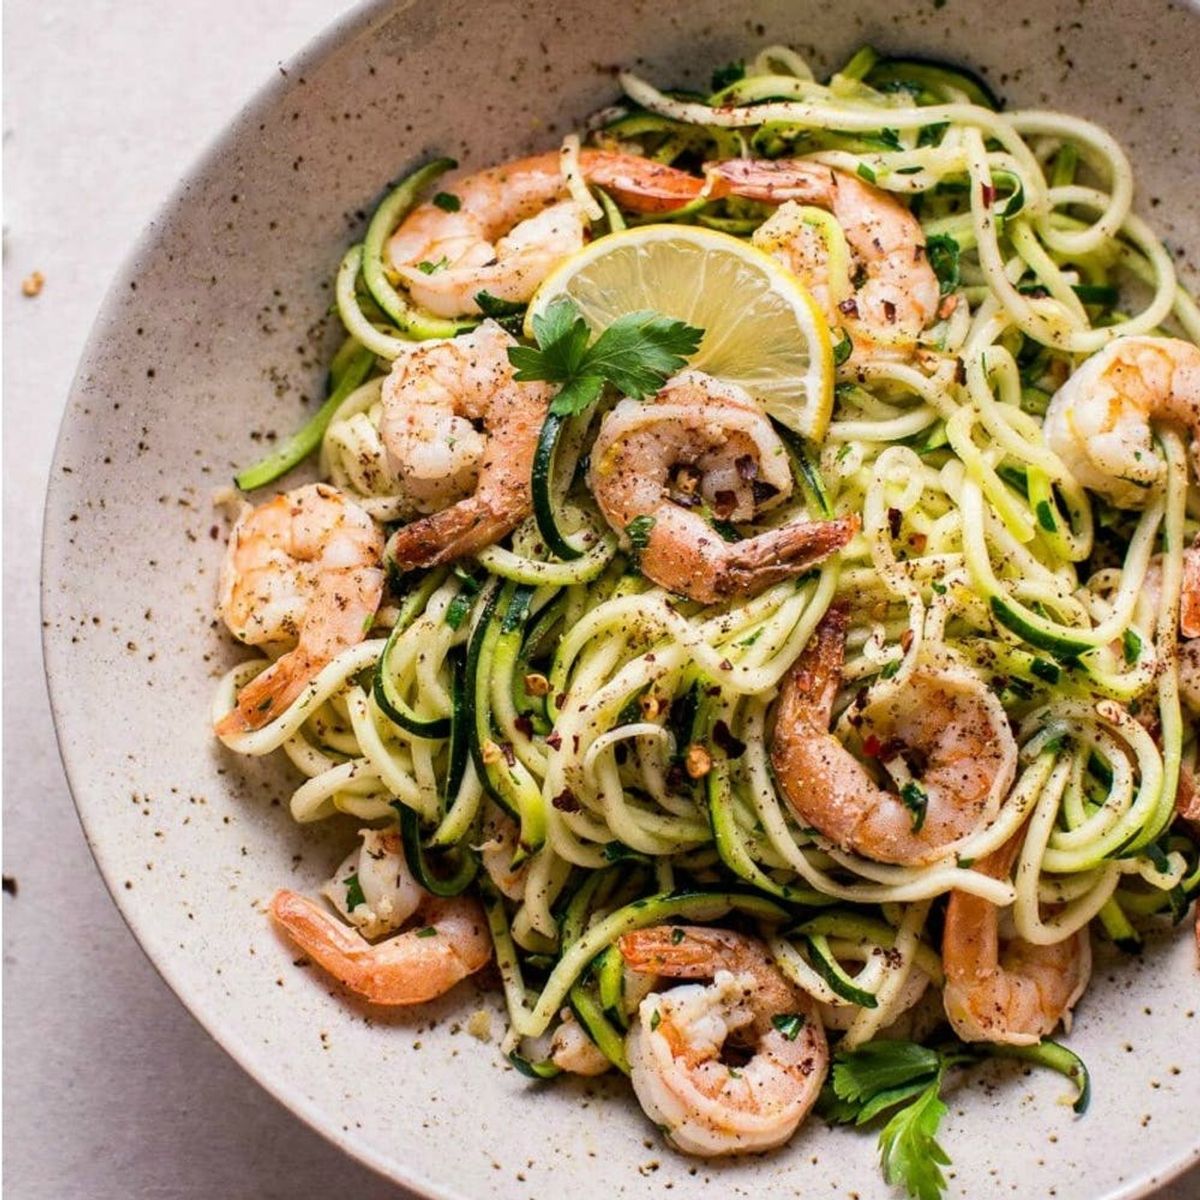 Stay on Track With These 12 Keto-Friendly Valentine’s Day Dinner Recipes